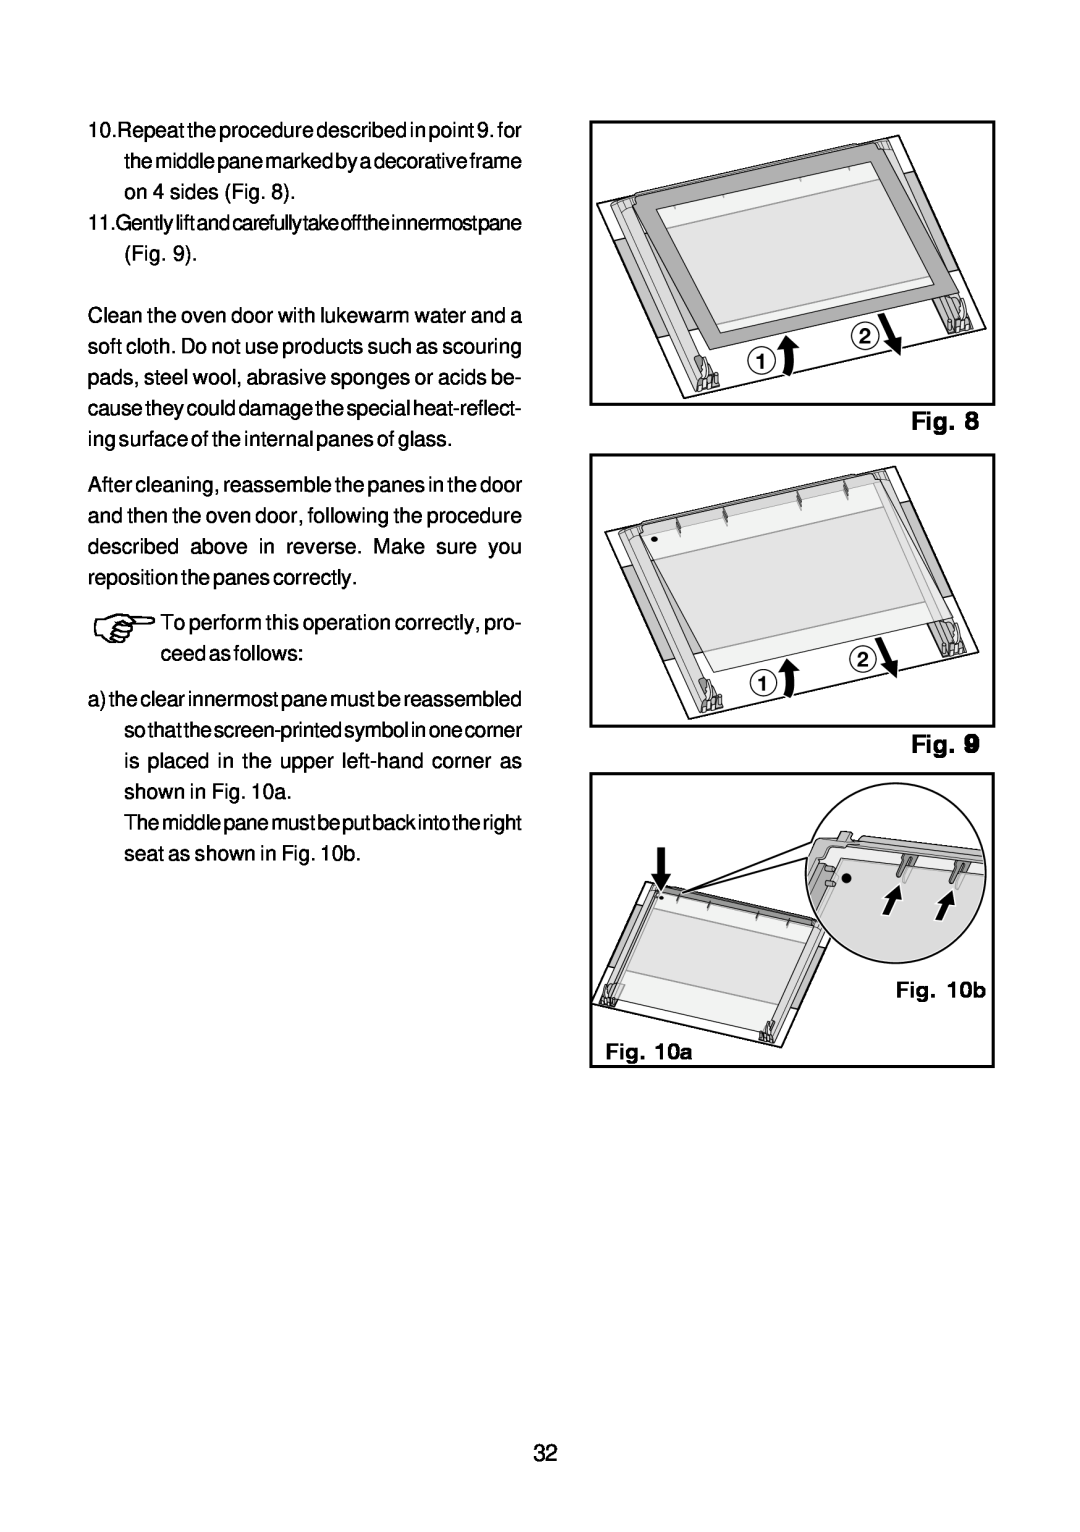 John Lewis JLBIOS664 instruction manual To perform this operation correctly, pro- ceed as follows, b 